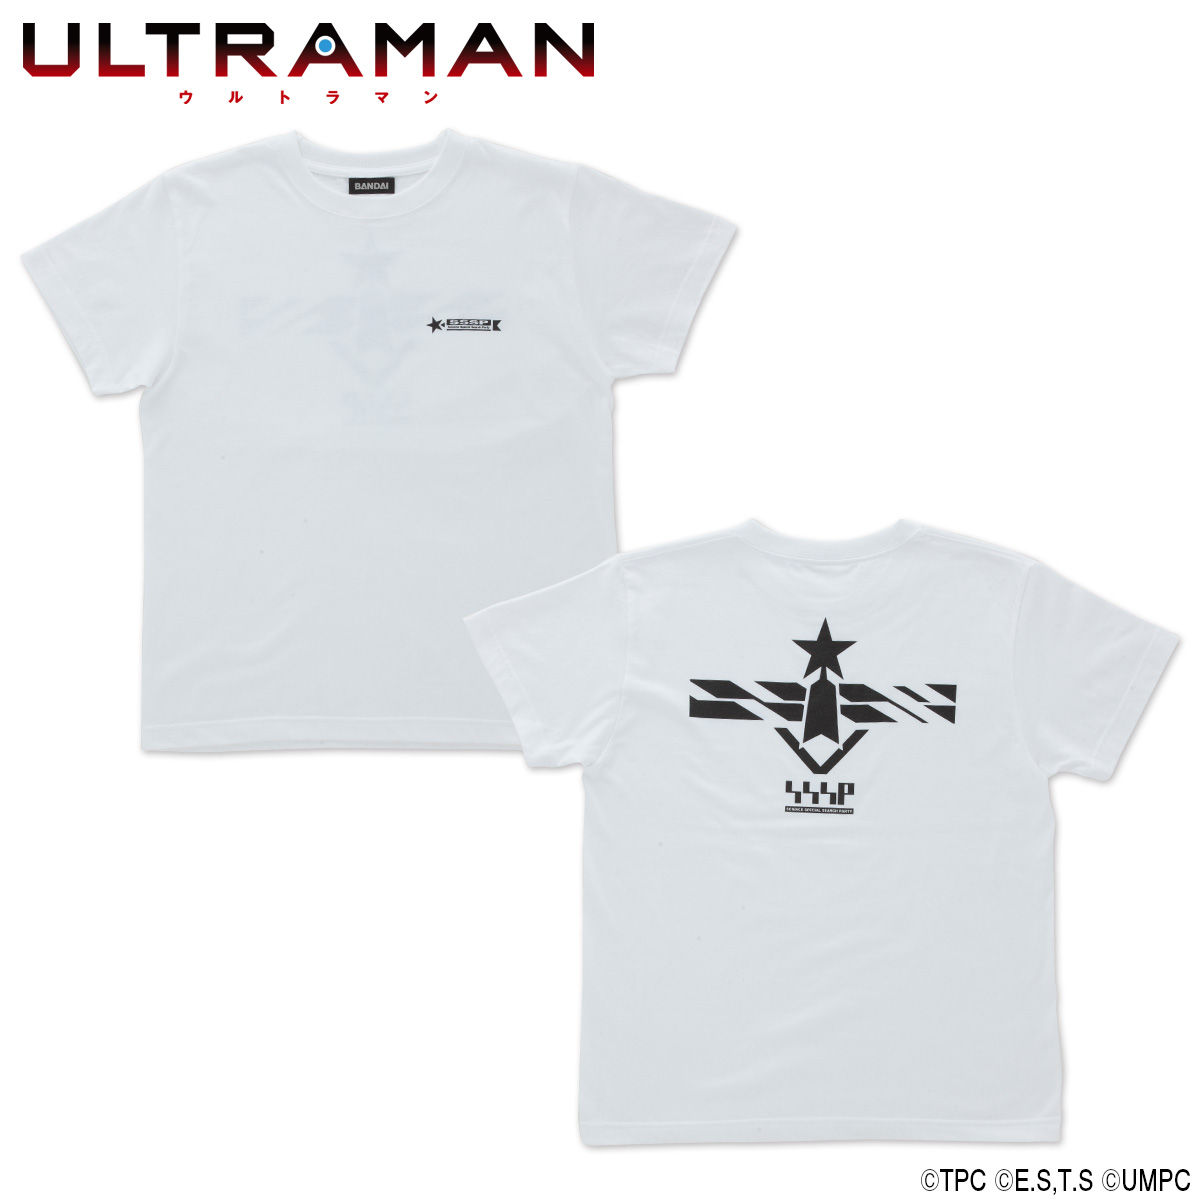 Animation Ultraman T Shirt Sssp Mark Ultraman Premium Bandai Usa Online Store For Action Figures Model Kits Toys And More